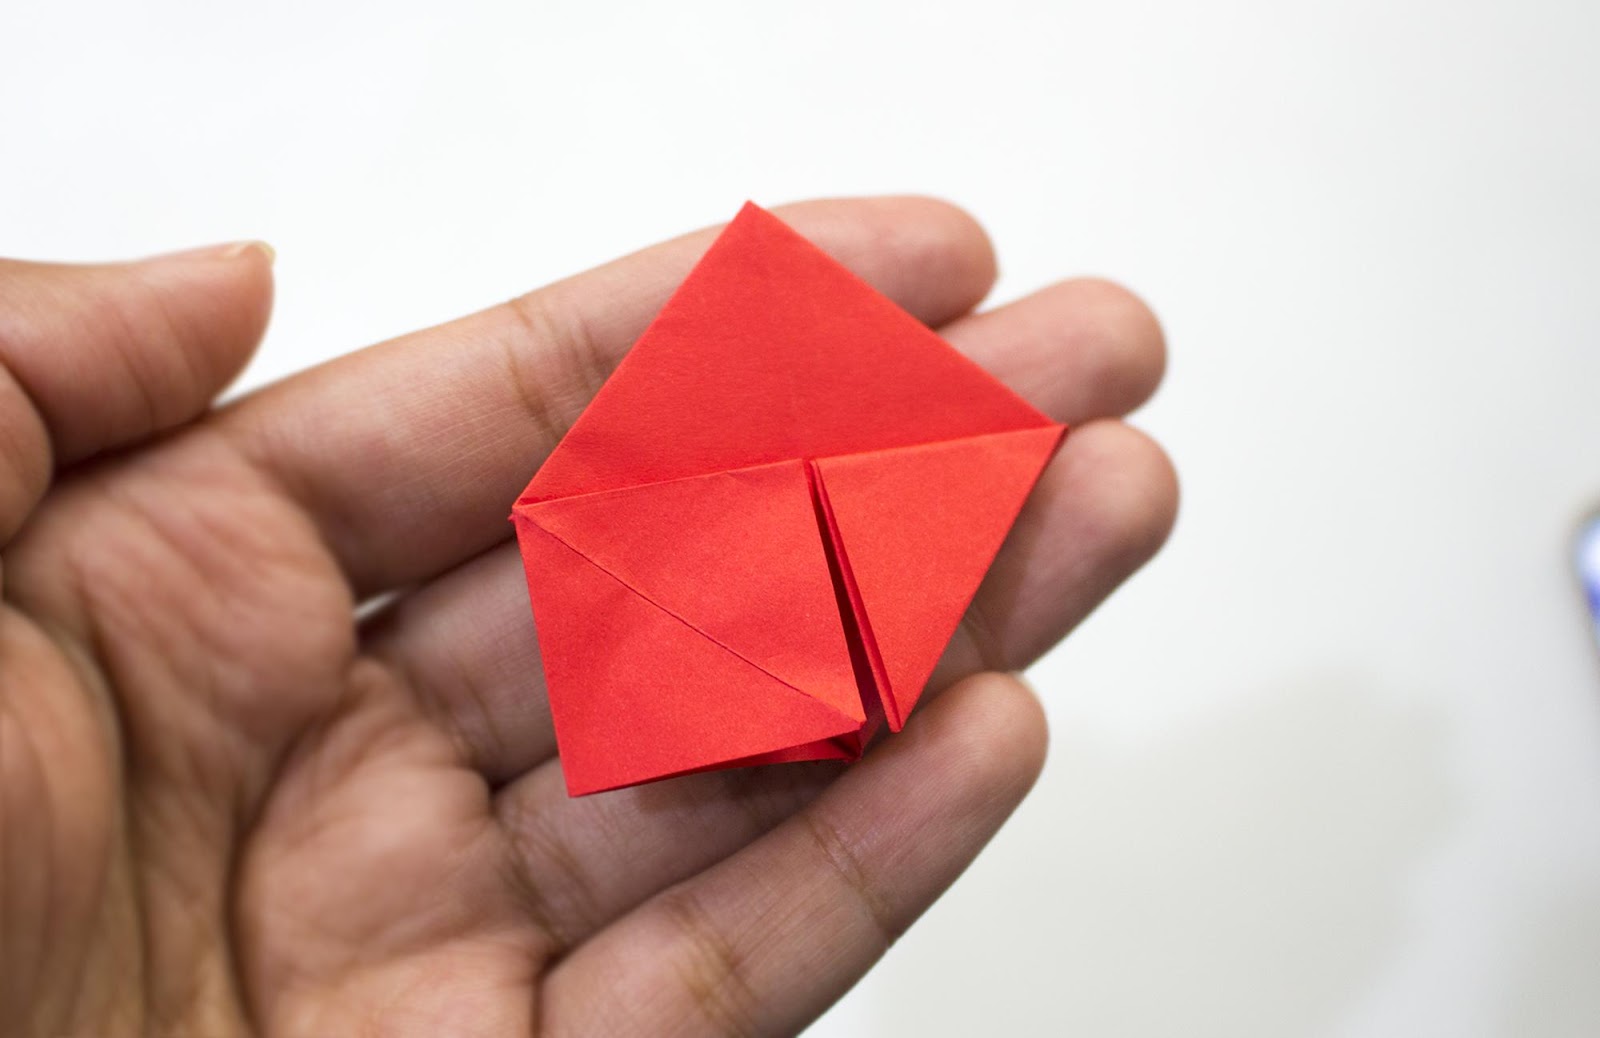 Red paper in the shape of a house